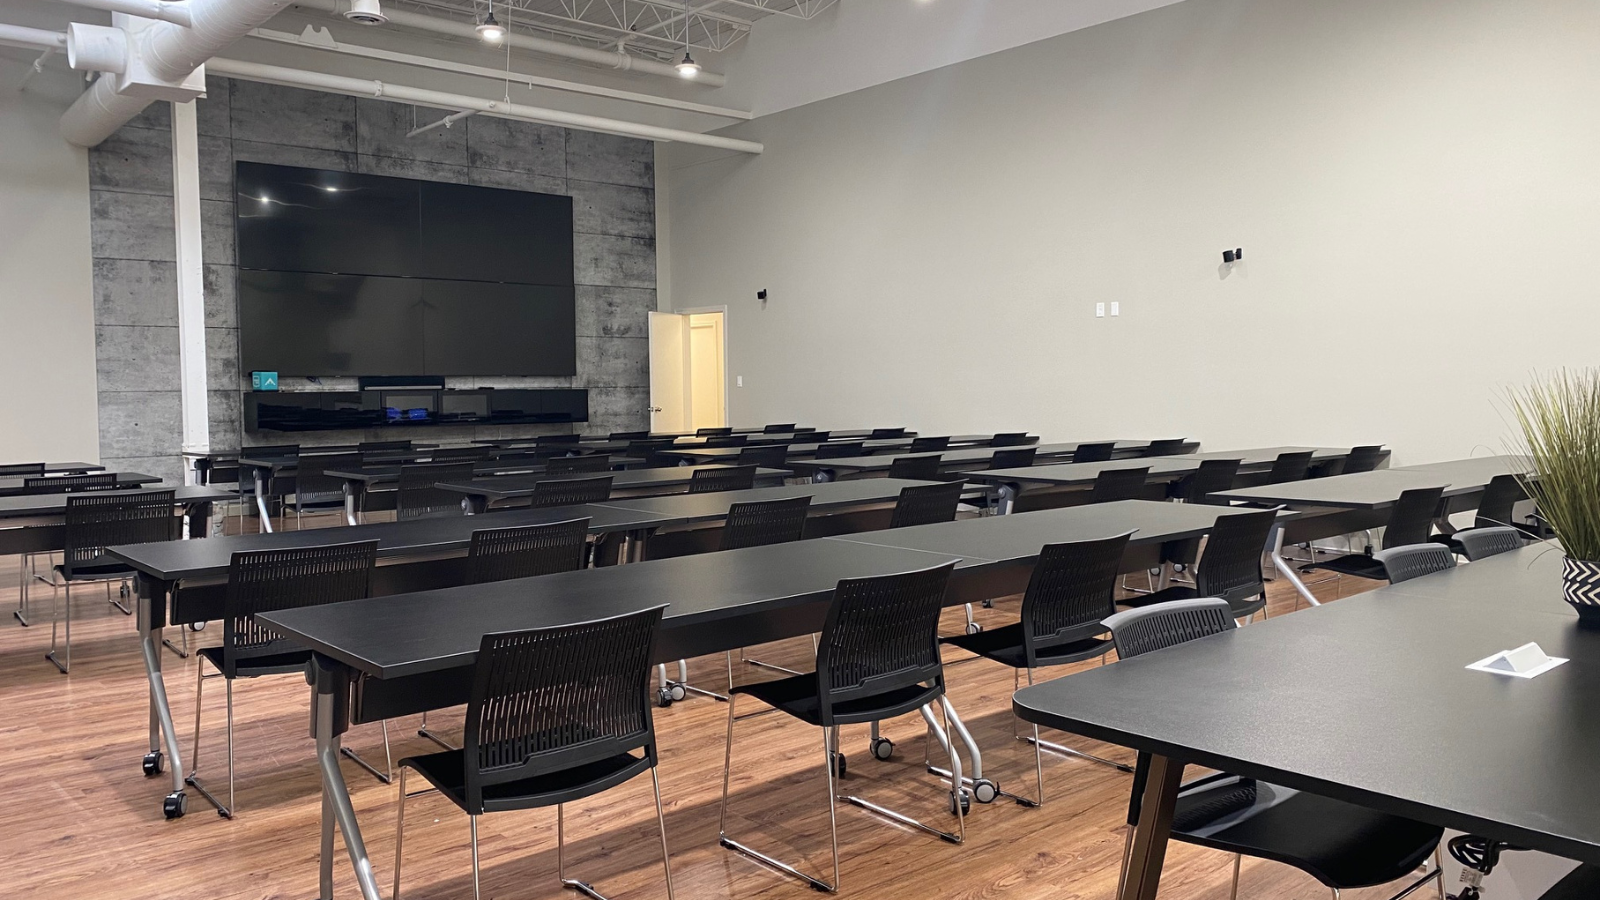 Innovation centre training room with tables, chairs, and tv